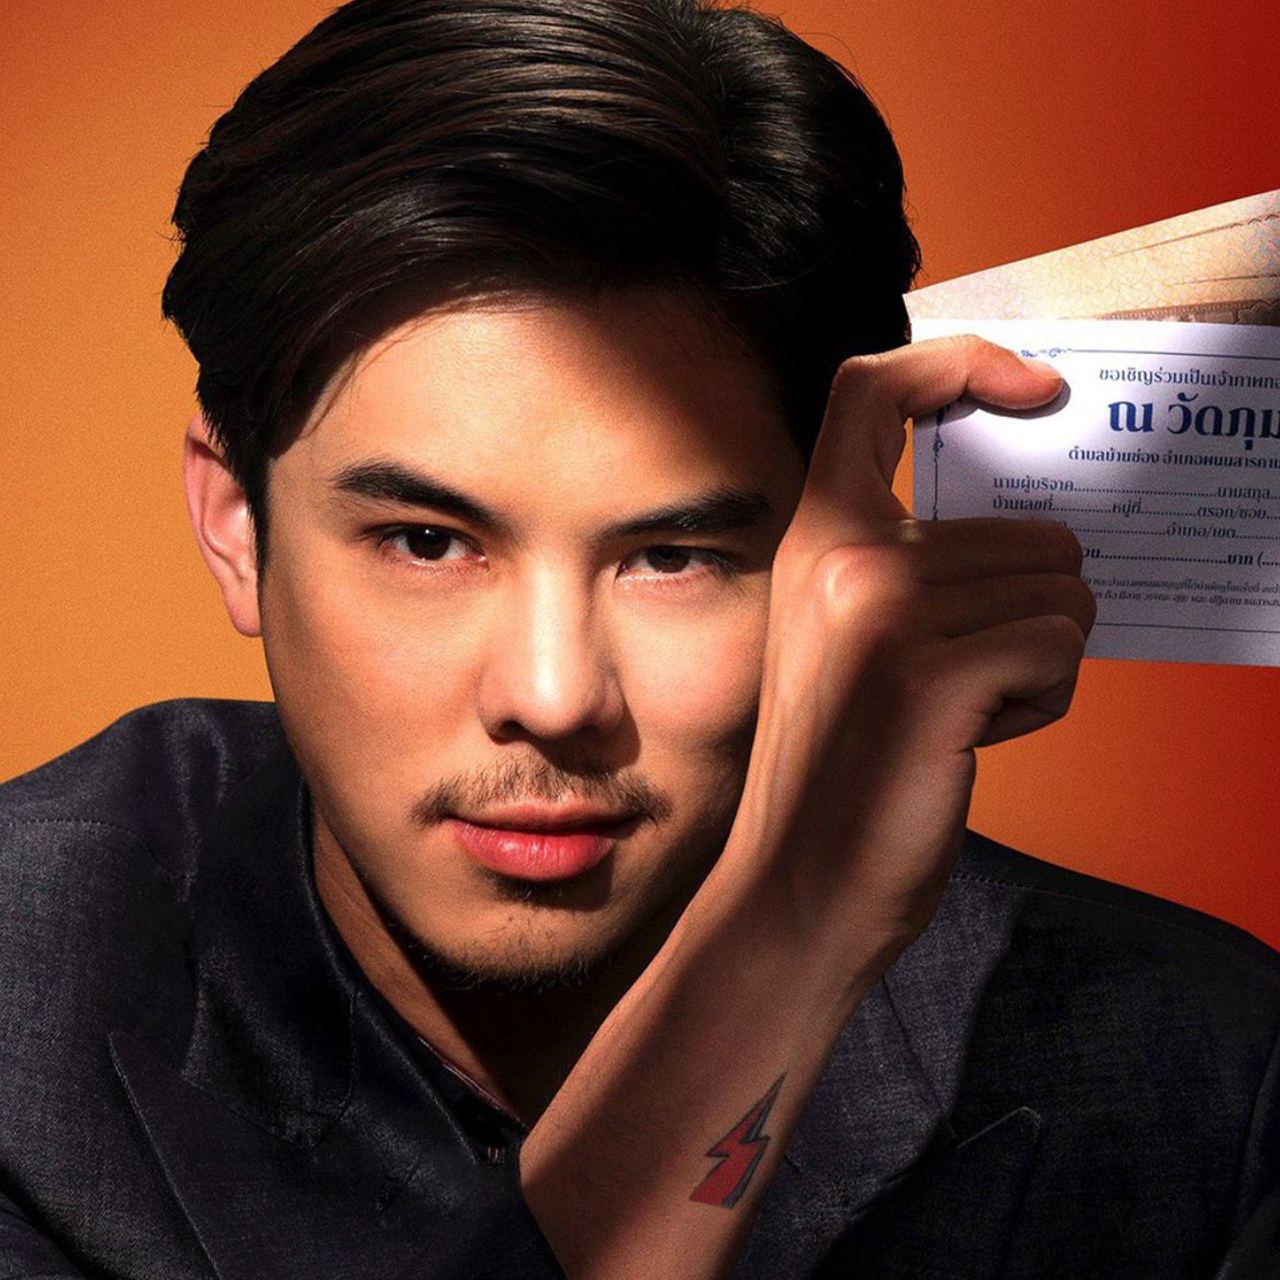 EXCLUSIVE: Peach Pachara on the Business of Faith in Thai Crime Series 'The Believers'